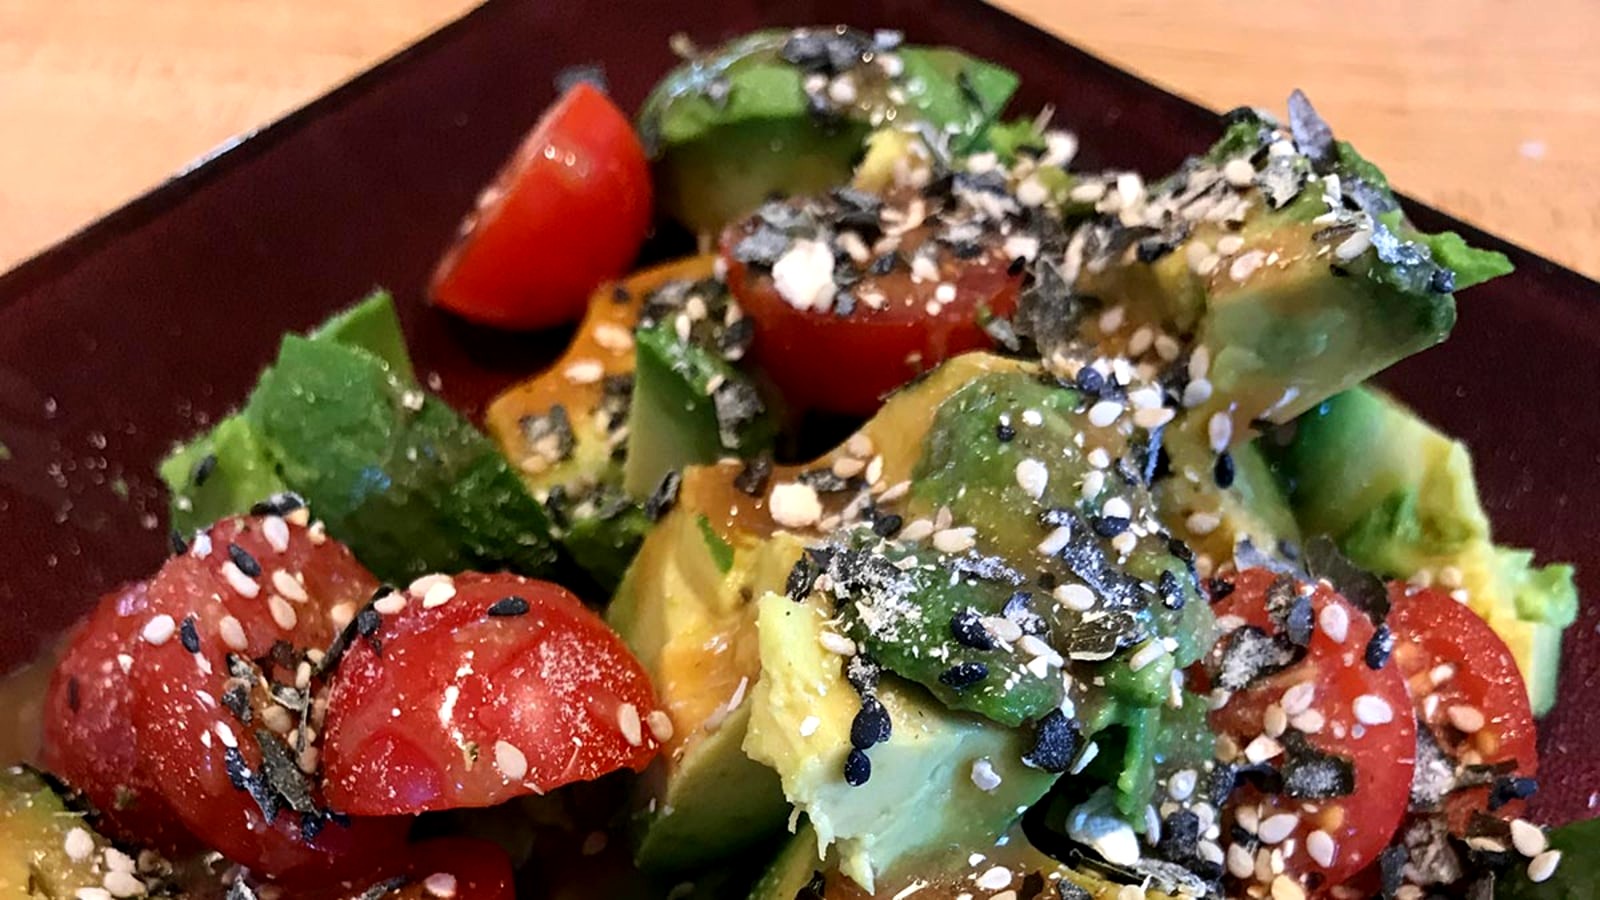 Image of Avocado & Tomato Salad with Miso Dressing and Bonito Sprinkle